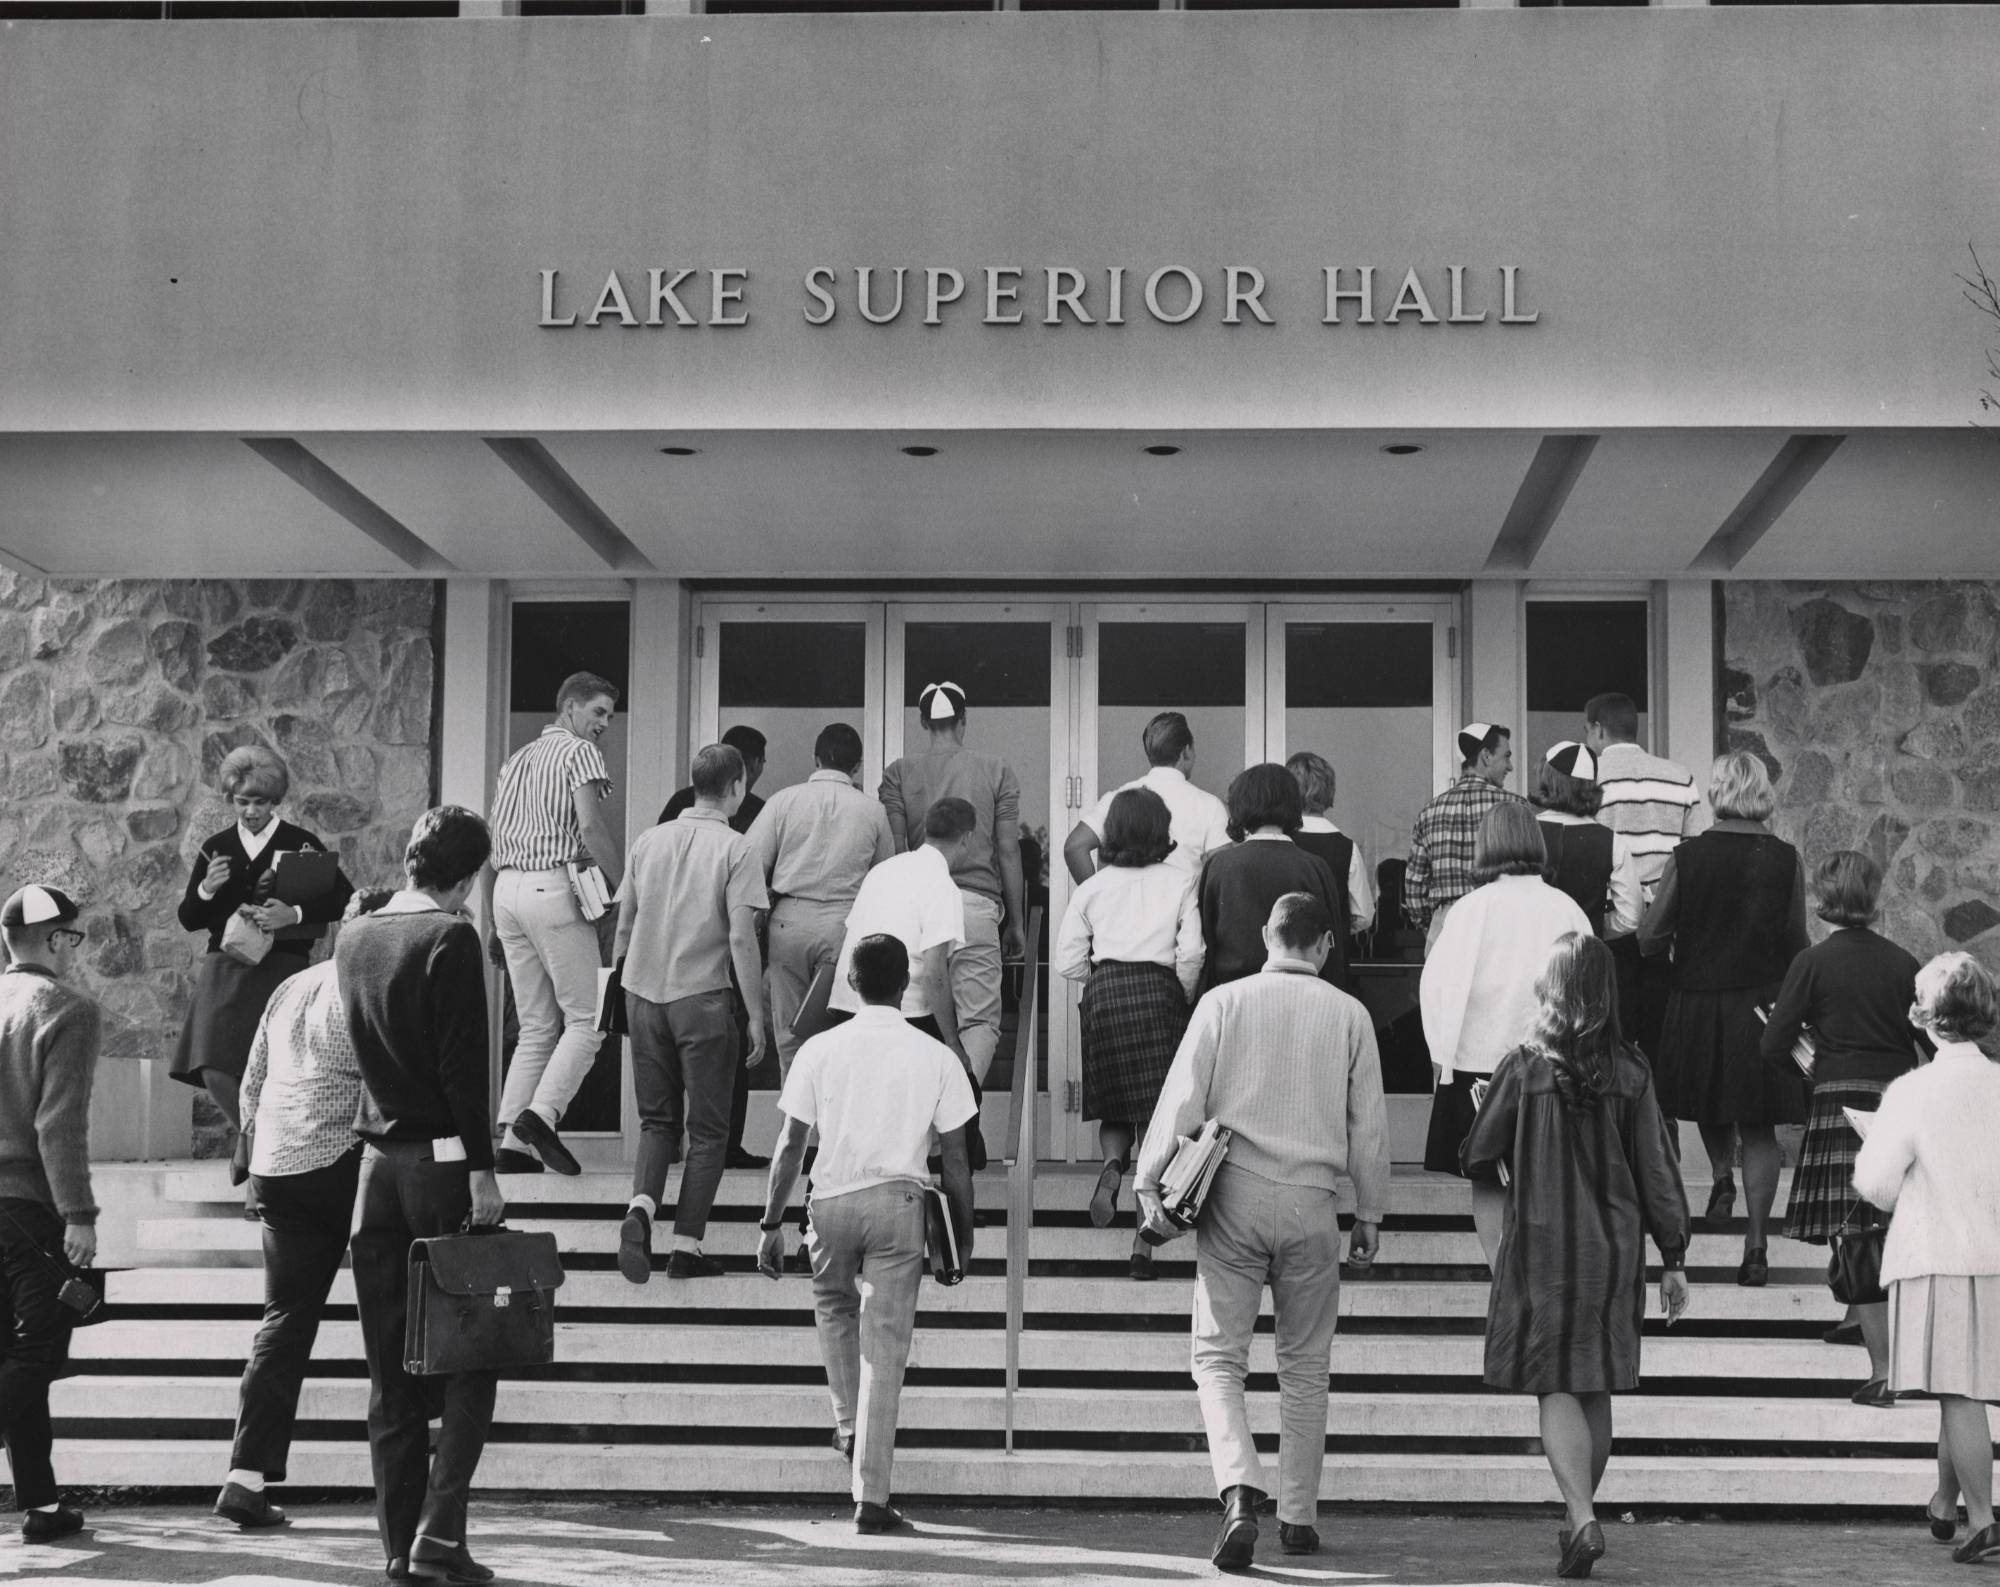 Students walking up the steps of Lake Superior Hall.